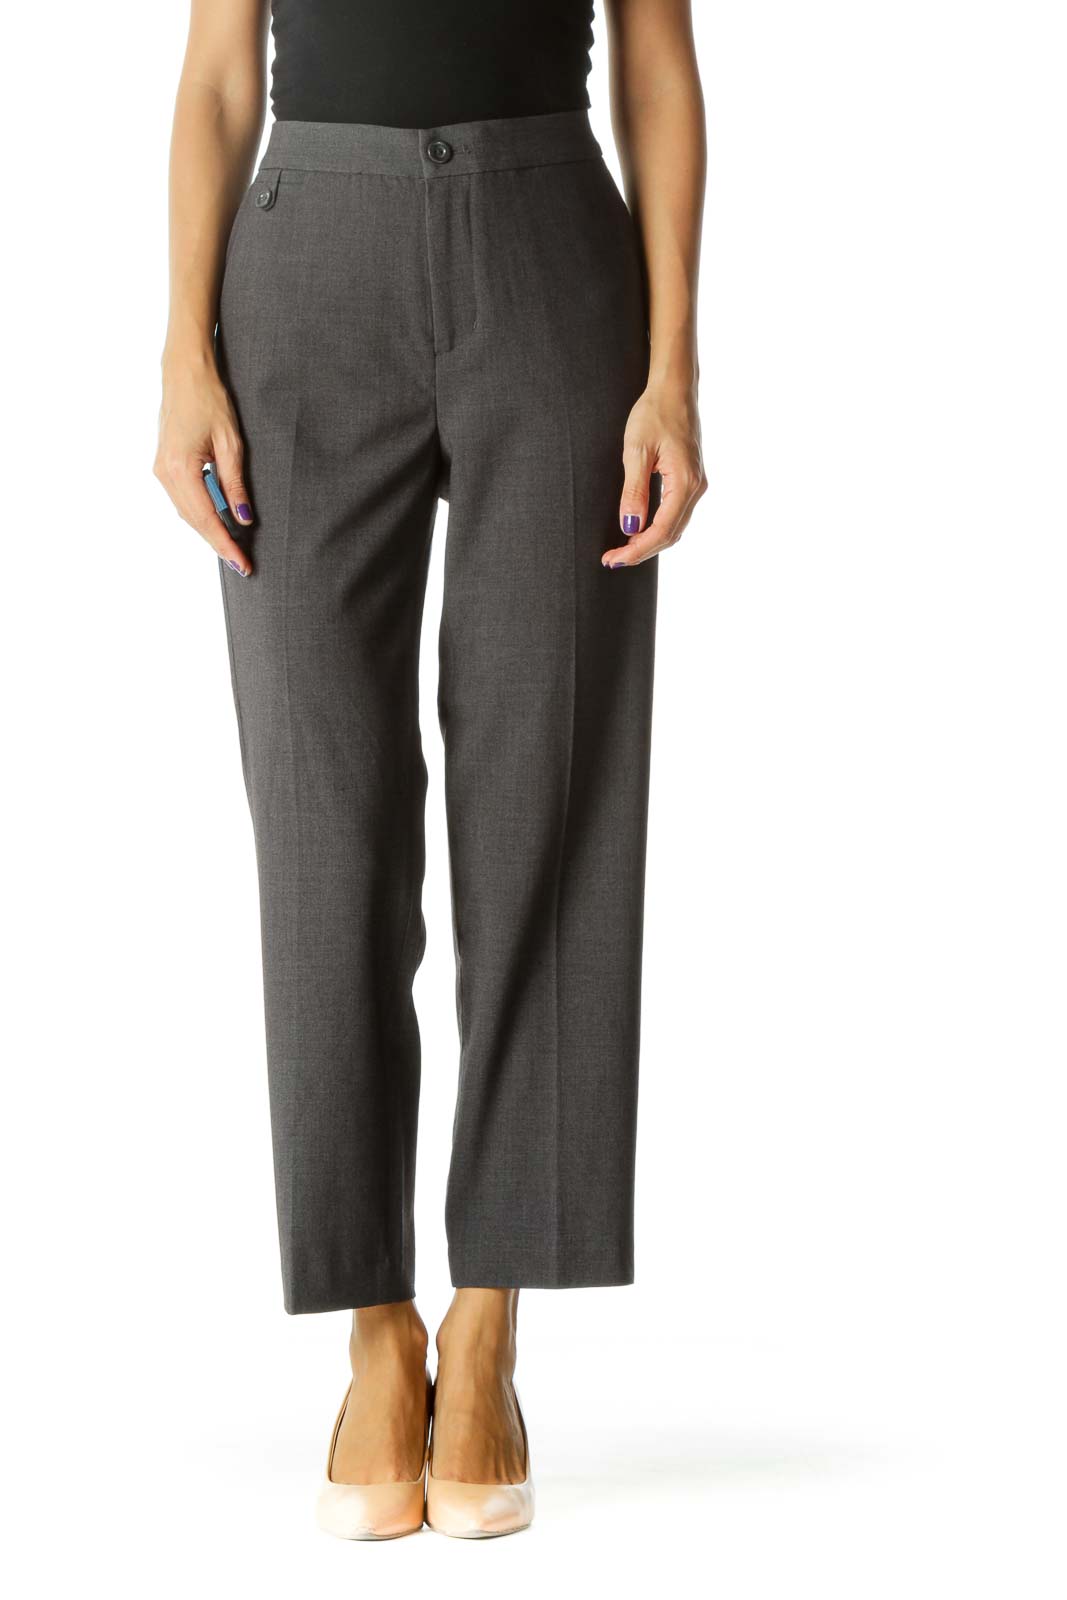 Gray Pocketed Thin Tapered Cropped Pants Front